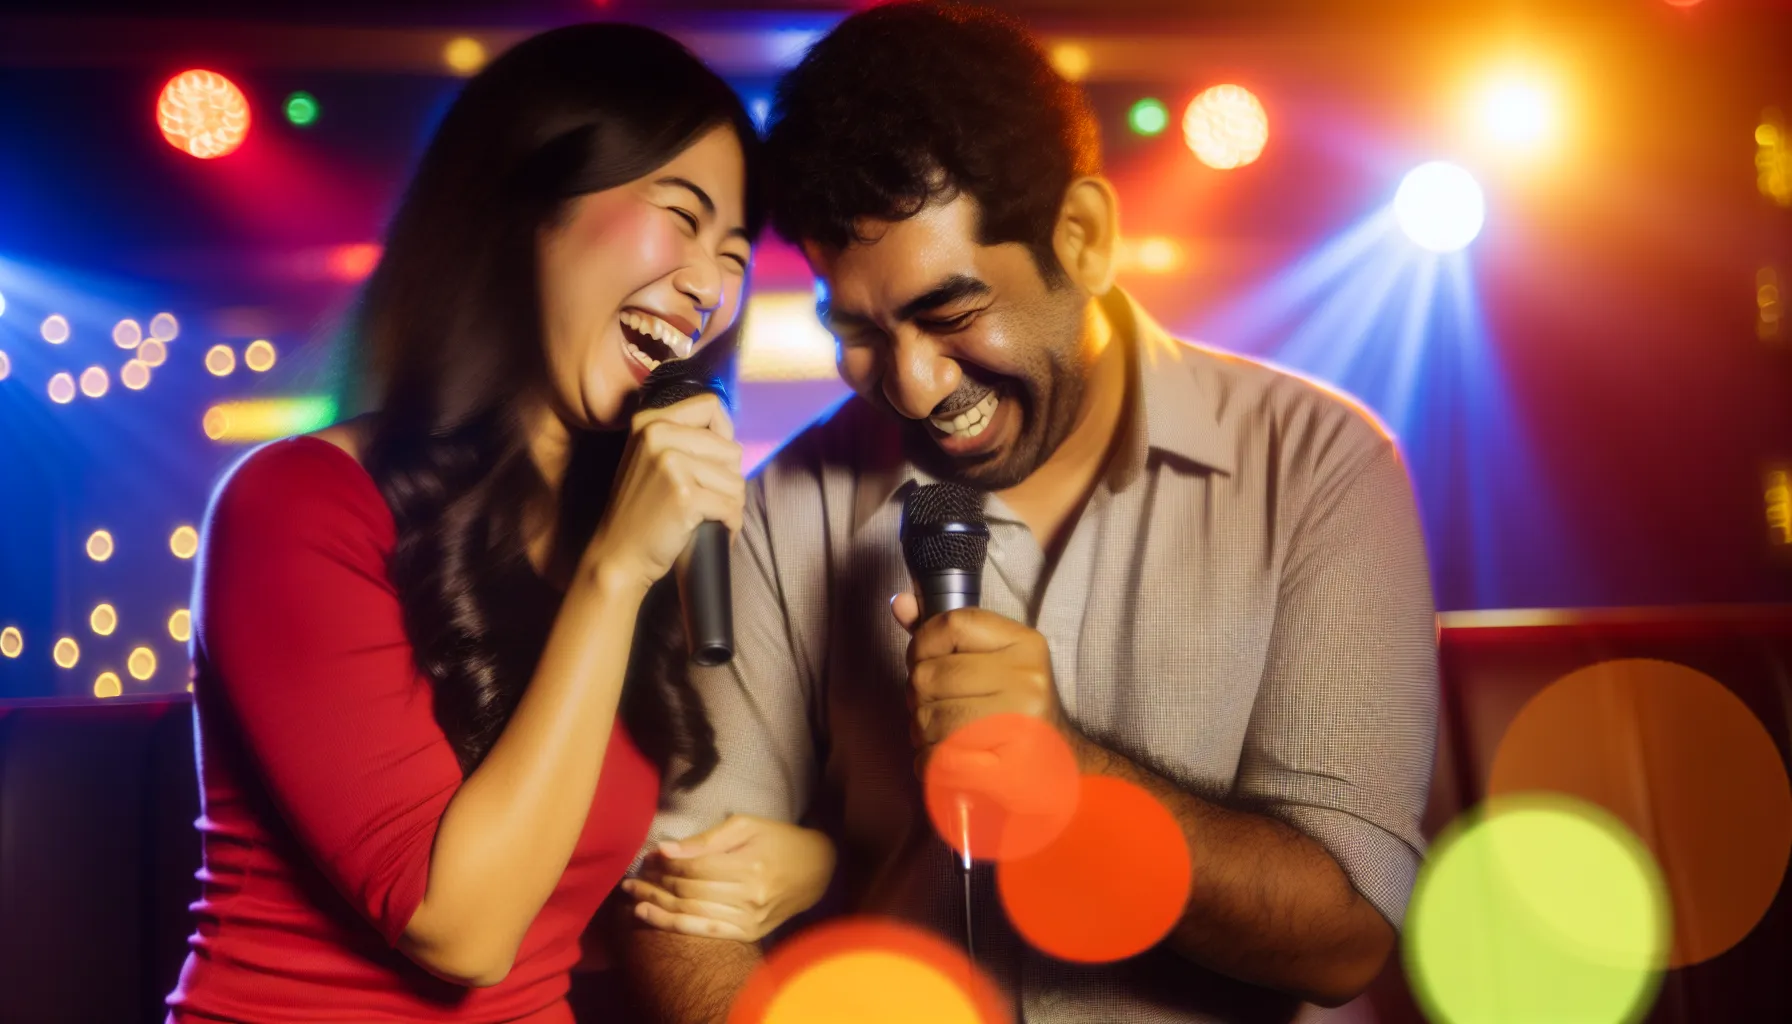 As the melody carries them away, their laughter harmonizes with the song, crafting an <strong>unforgettable duet</strong> that's about more than just music—it's the soundtrack of a deeper connection. Join the chorus of love at <a href='https://datingserviceusa.net/' target='_blank'>DatingServiceUSA</a>.